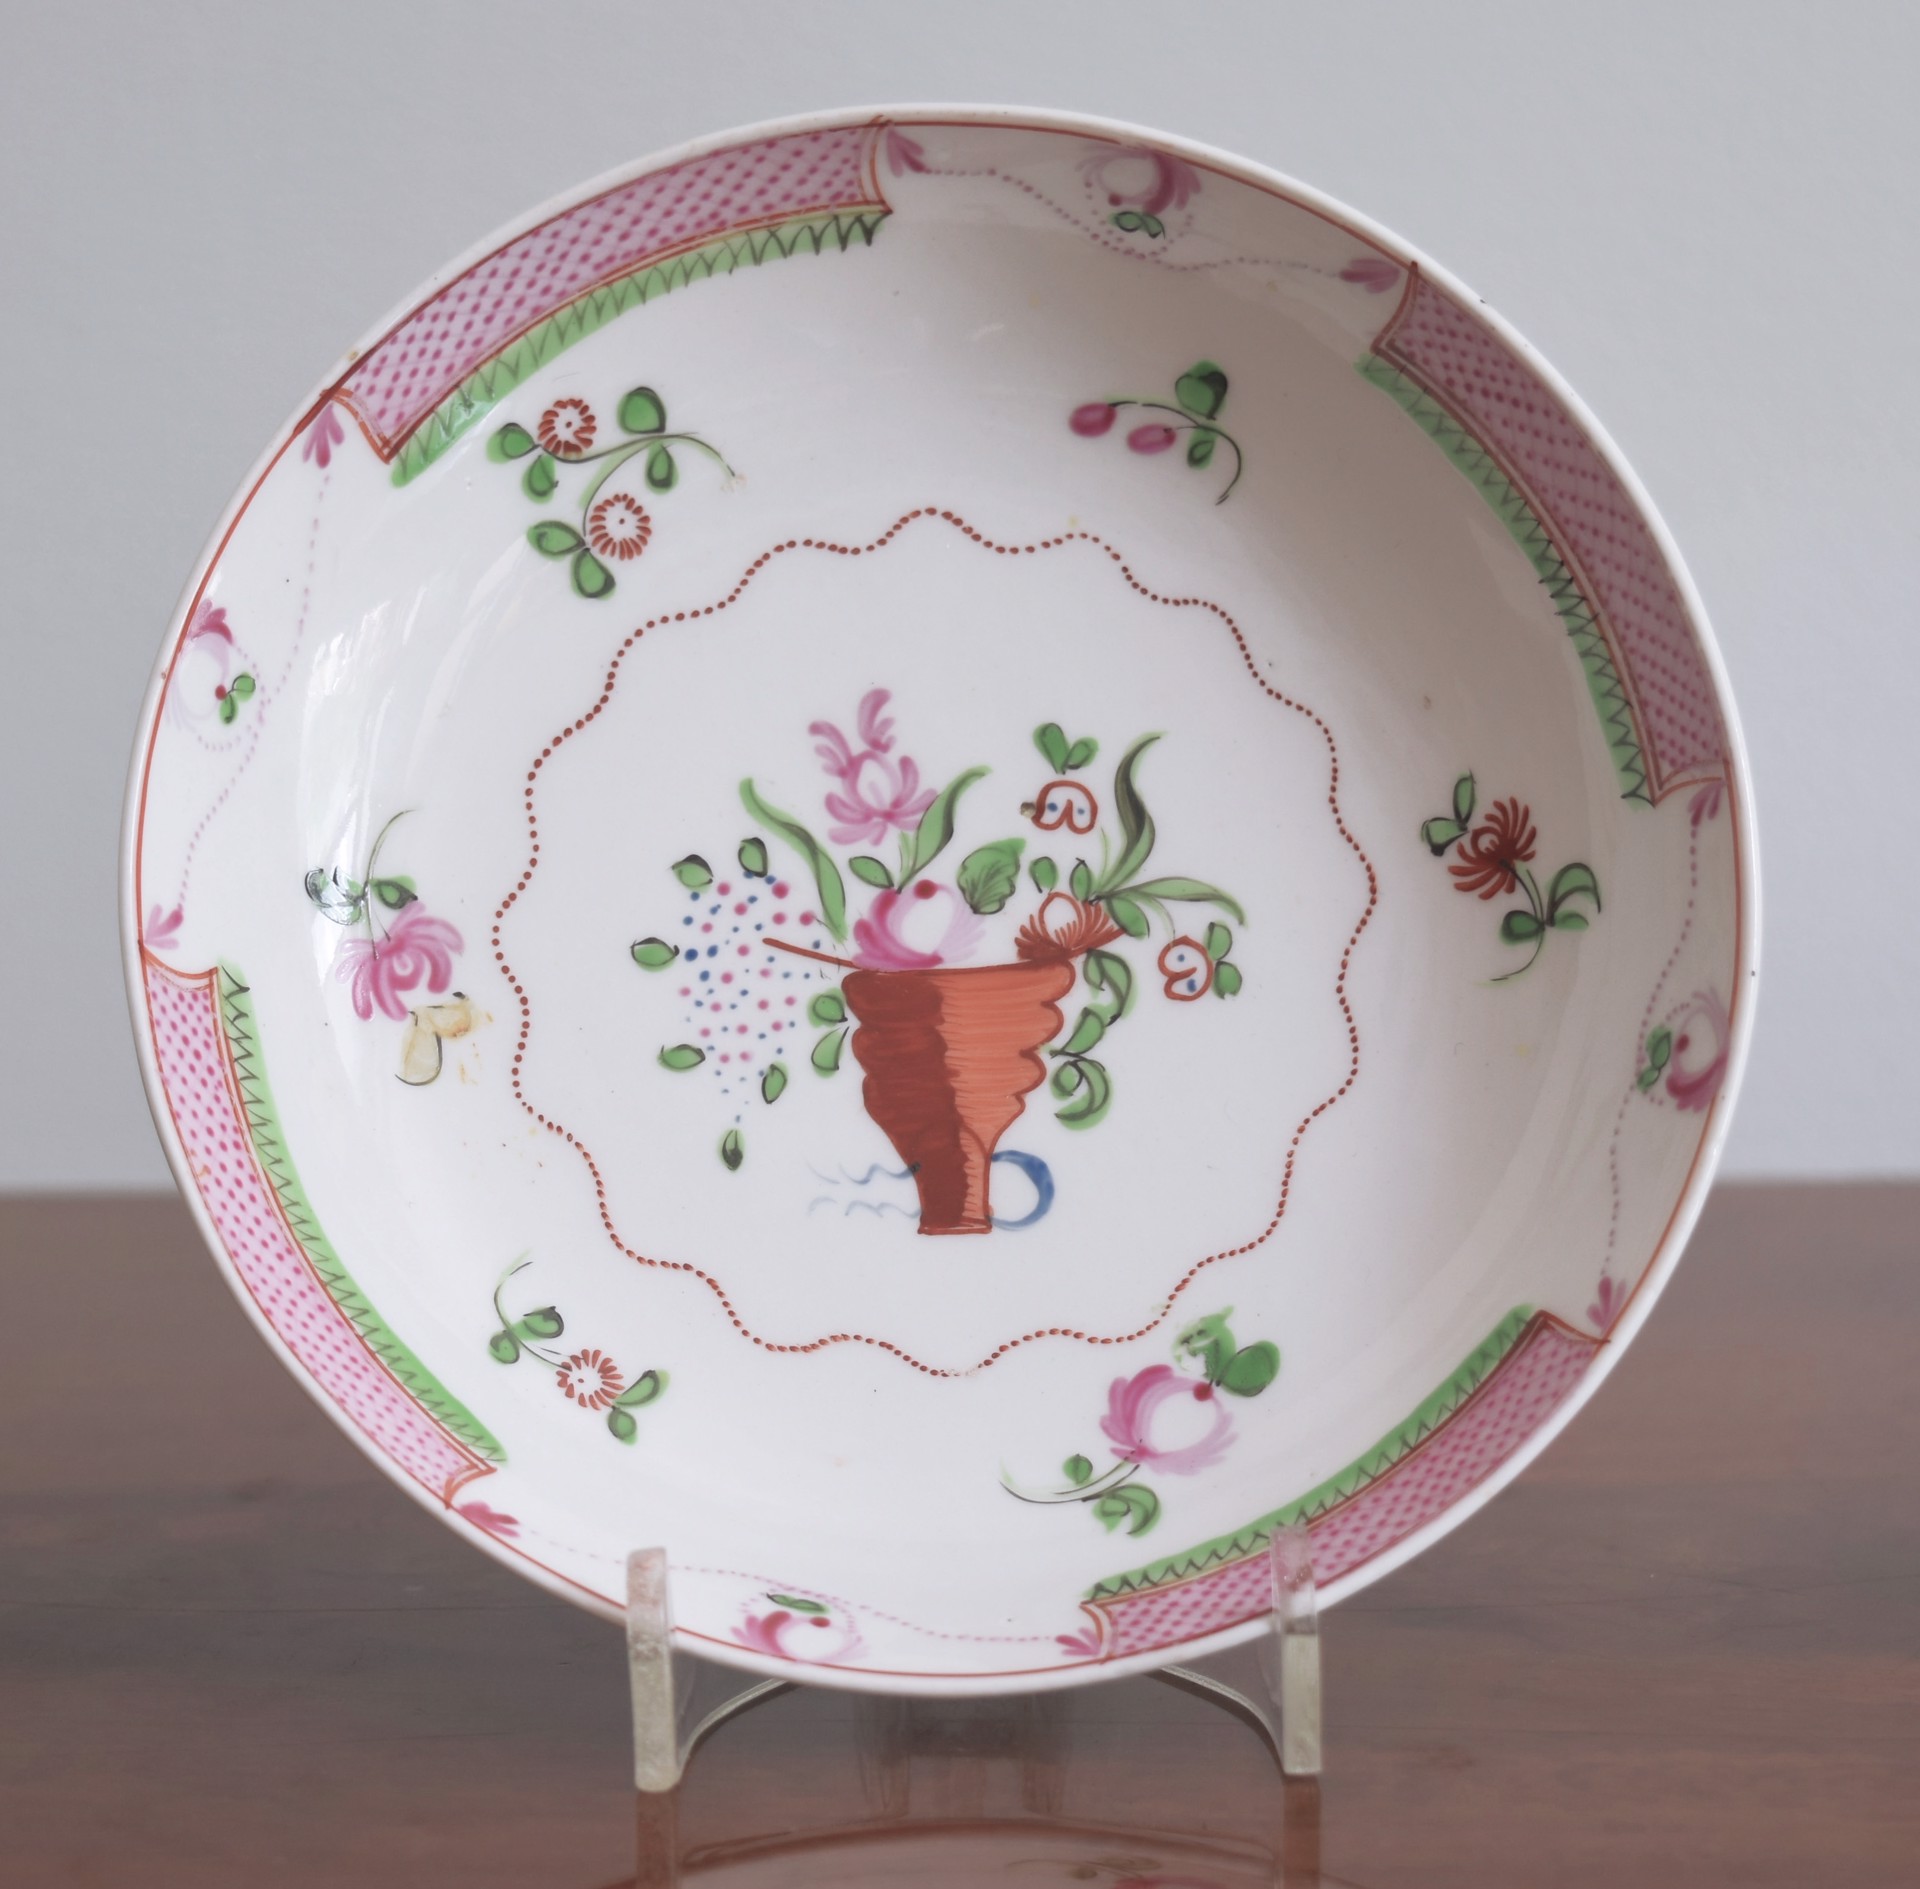 A BARBED FAMILLE ROSE SAUCER WITH FLORAL CORNUCOPIA